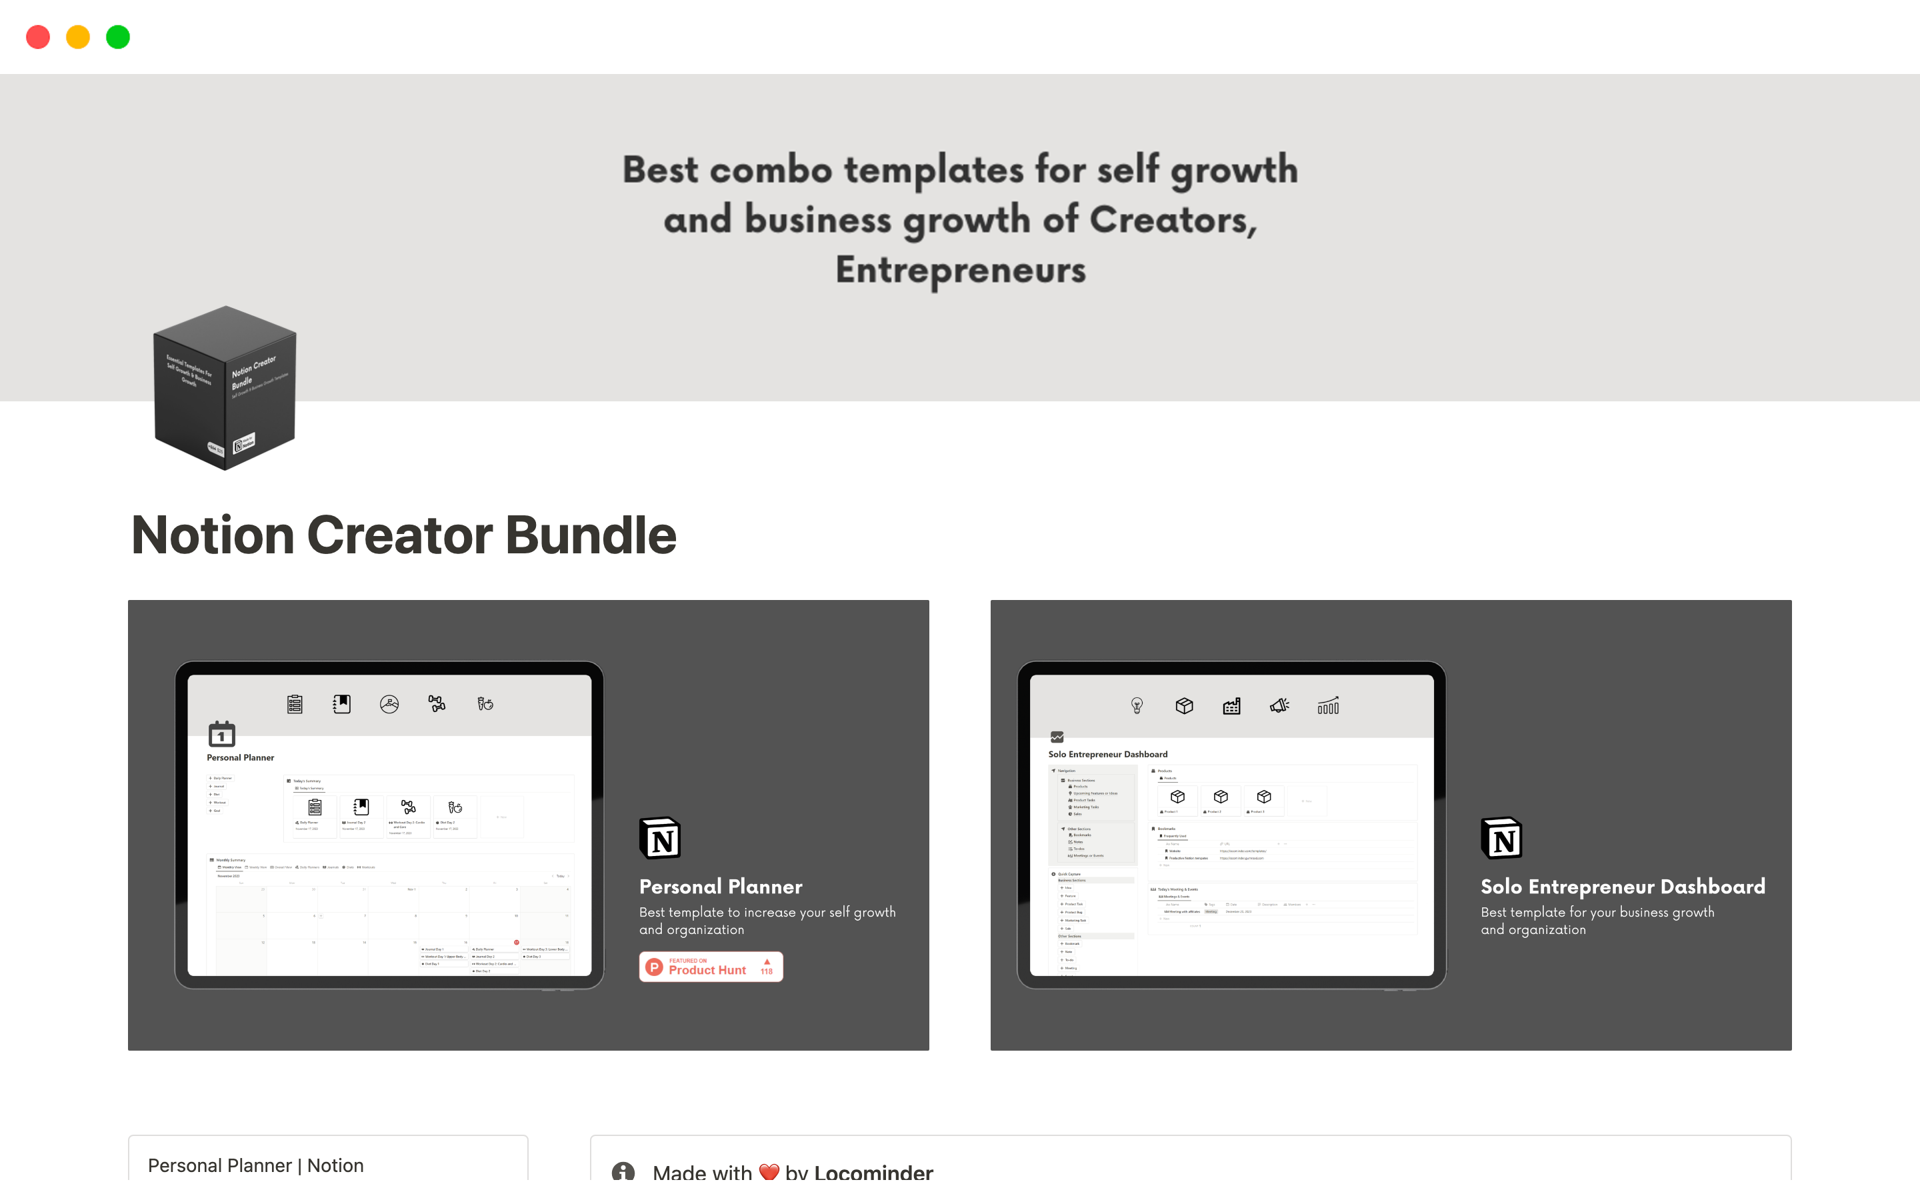 Best combo templates for self growth and business growth of Creators, Entrepreneurs